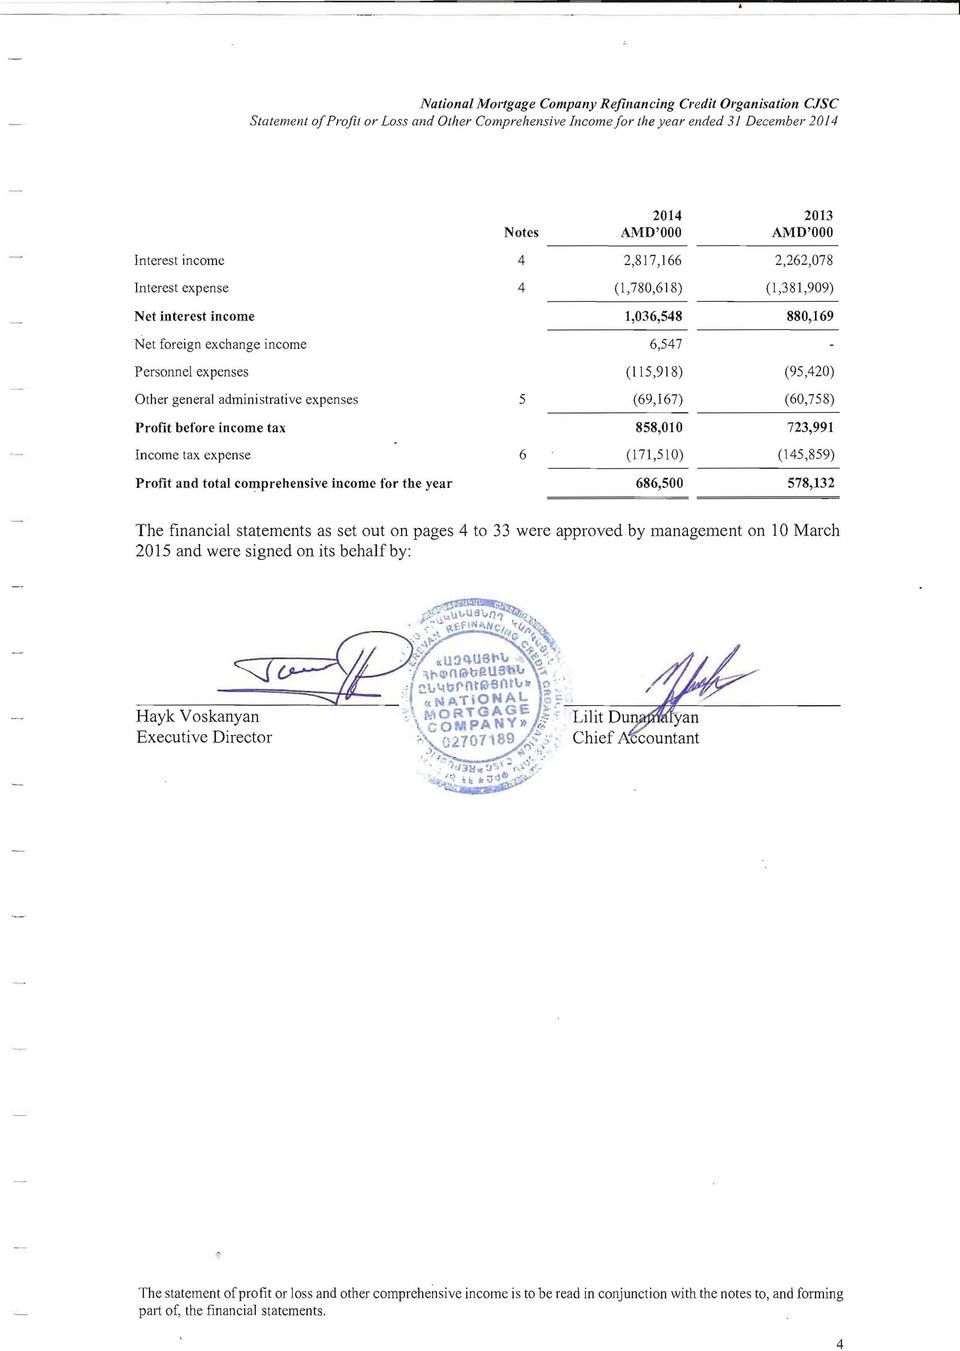 723,991 Income tax expense 6 (171,510) (145,859) Profit and total comprehensive income for the year 686,500 578,132 The financial statements as set out on pages 4 to 33 were approved by management on